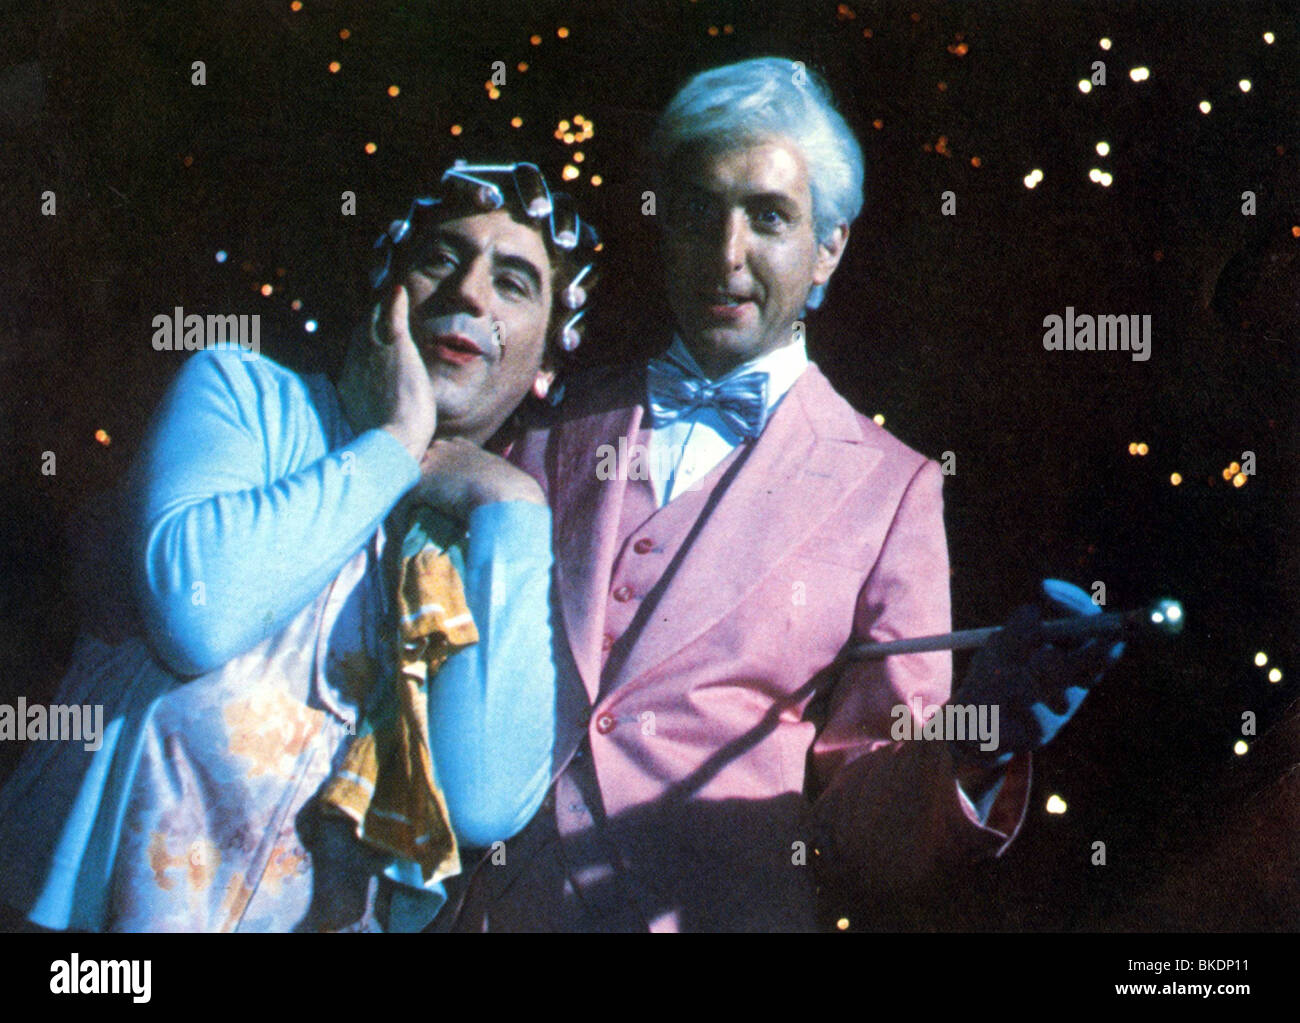 MONTY PYTHON'S THE MEANING OF LIFE (1983) TERRY JONES, ERIC IDLE MOLF 003FOH Stock Photo